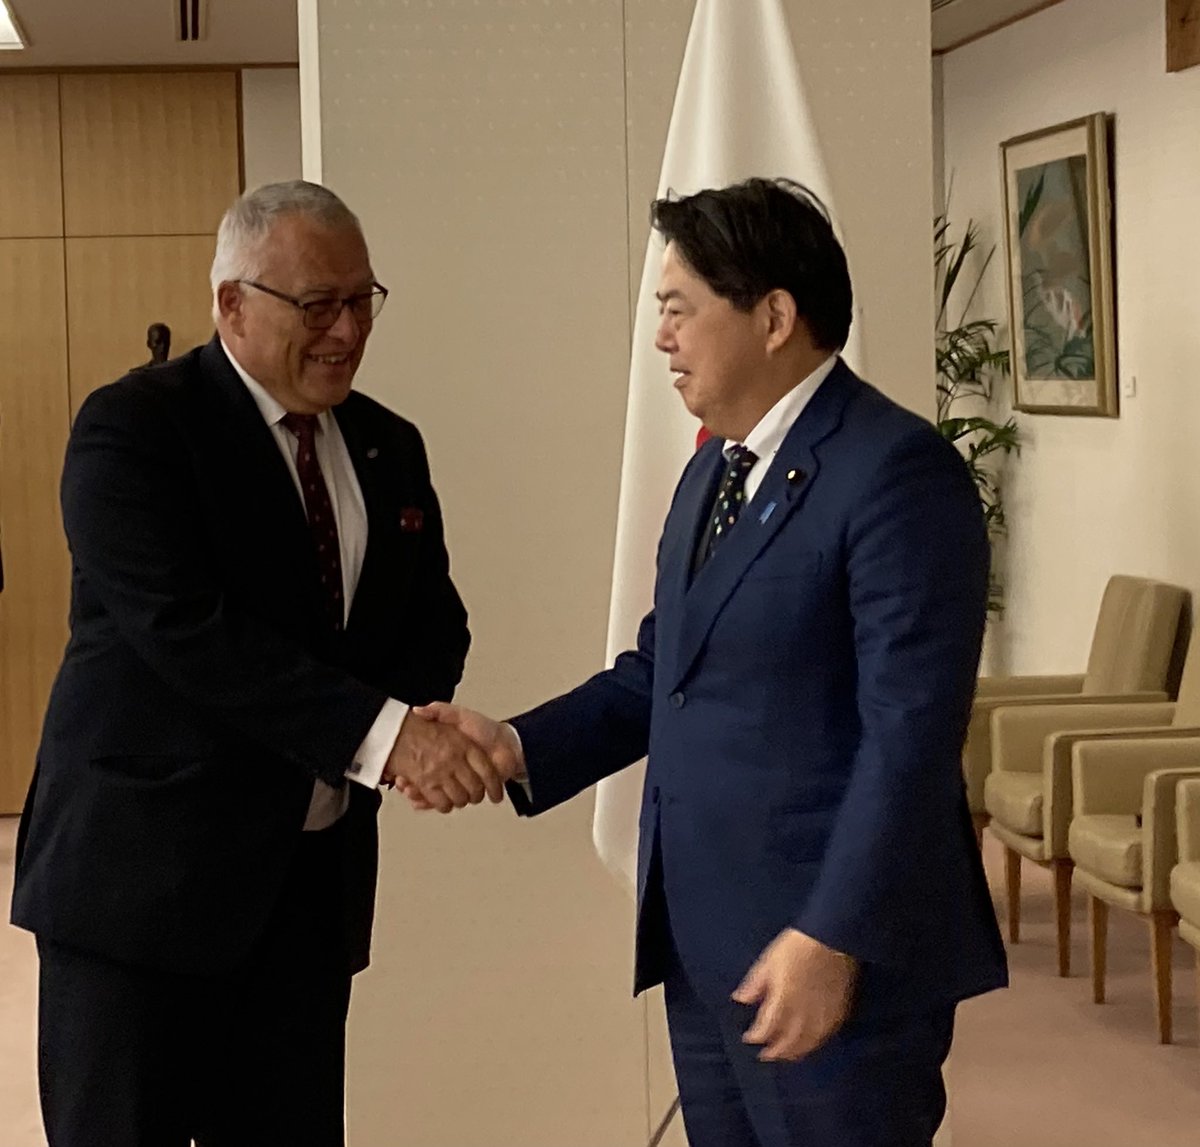 #ICC President Judge Piotr Hofmański met in Tokyo with the Minister of Foreign Affairs of #Japan H.E. Yoshimasa Hayashi and had constructive dialogue on how to address the challenges the ICC faces and promote the rule of law #BuildingSupport